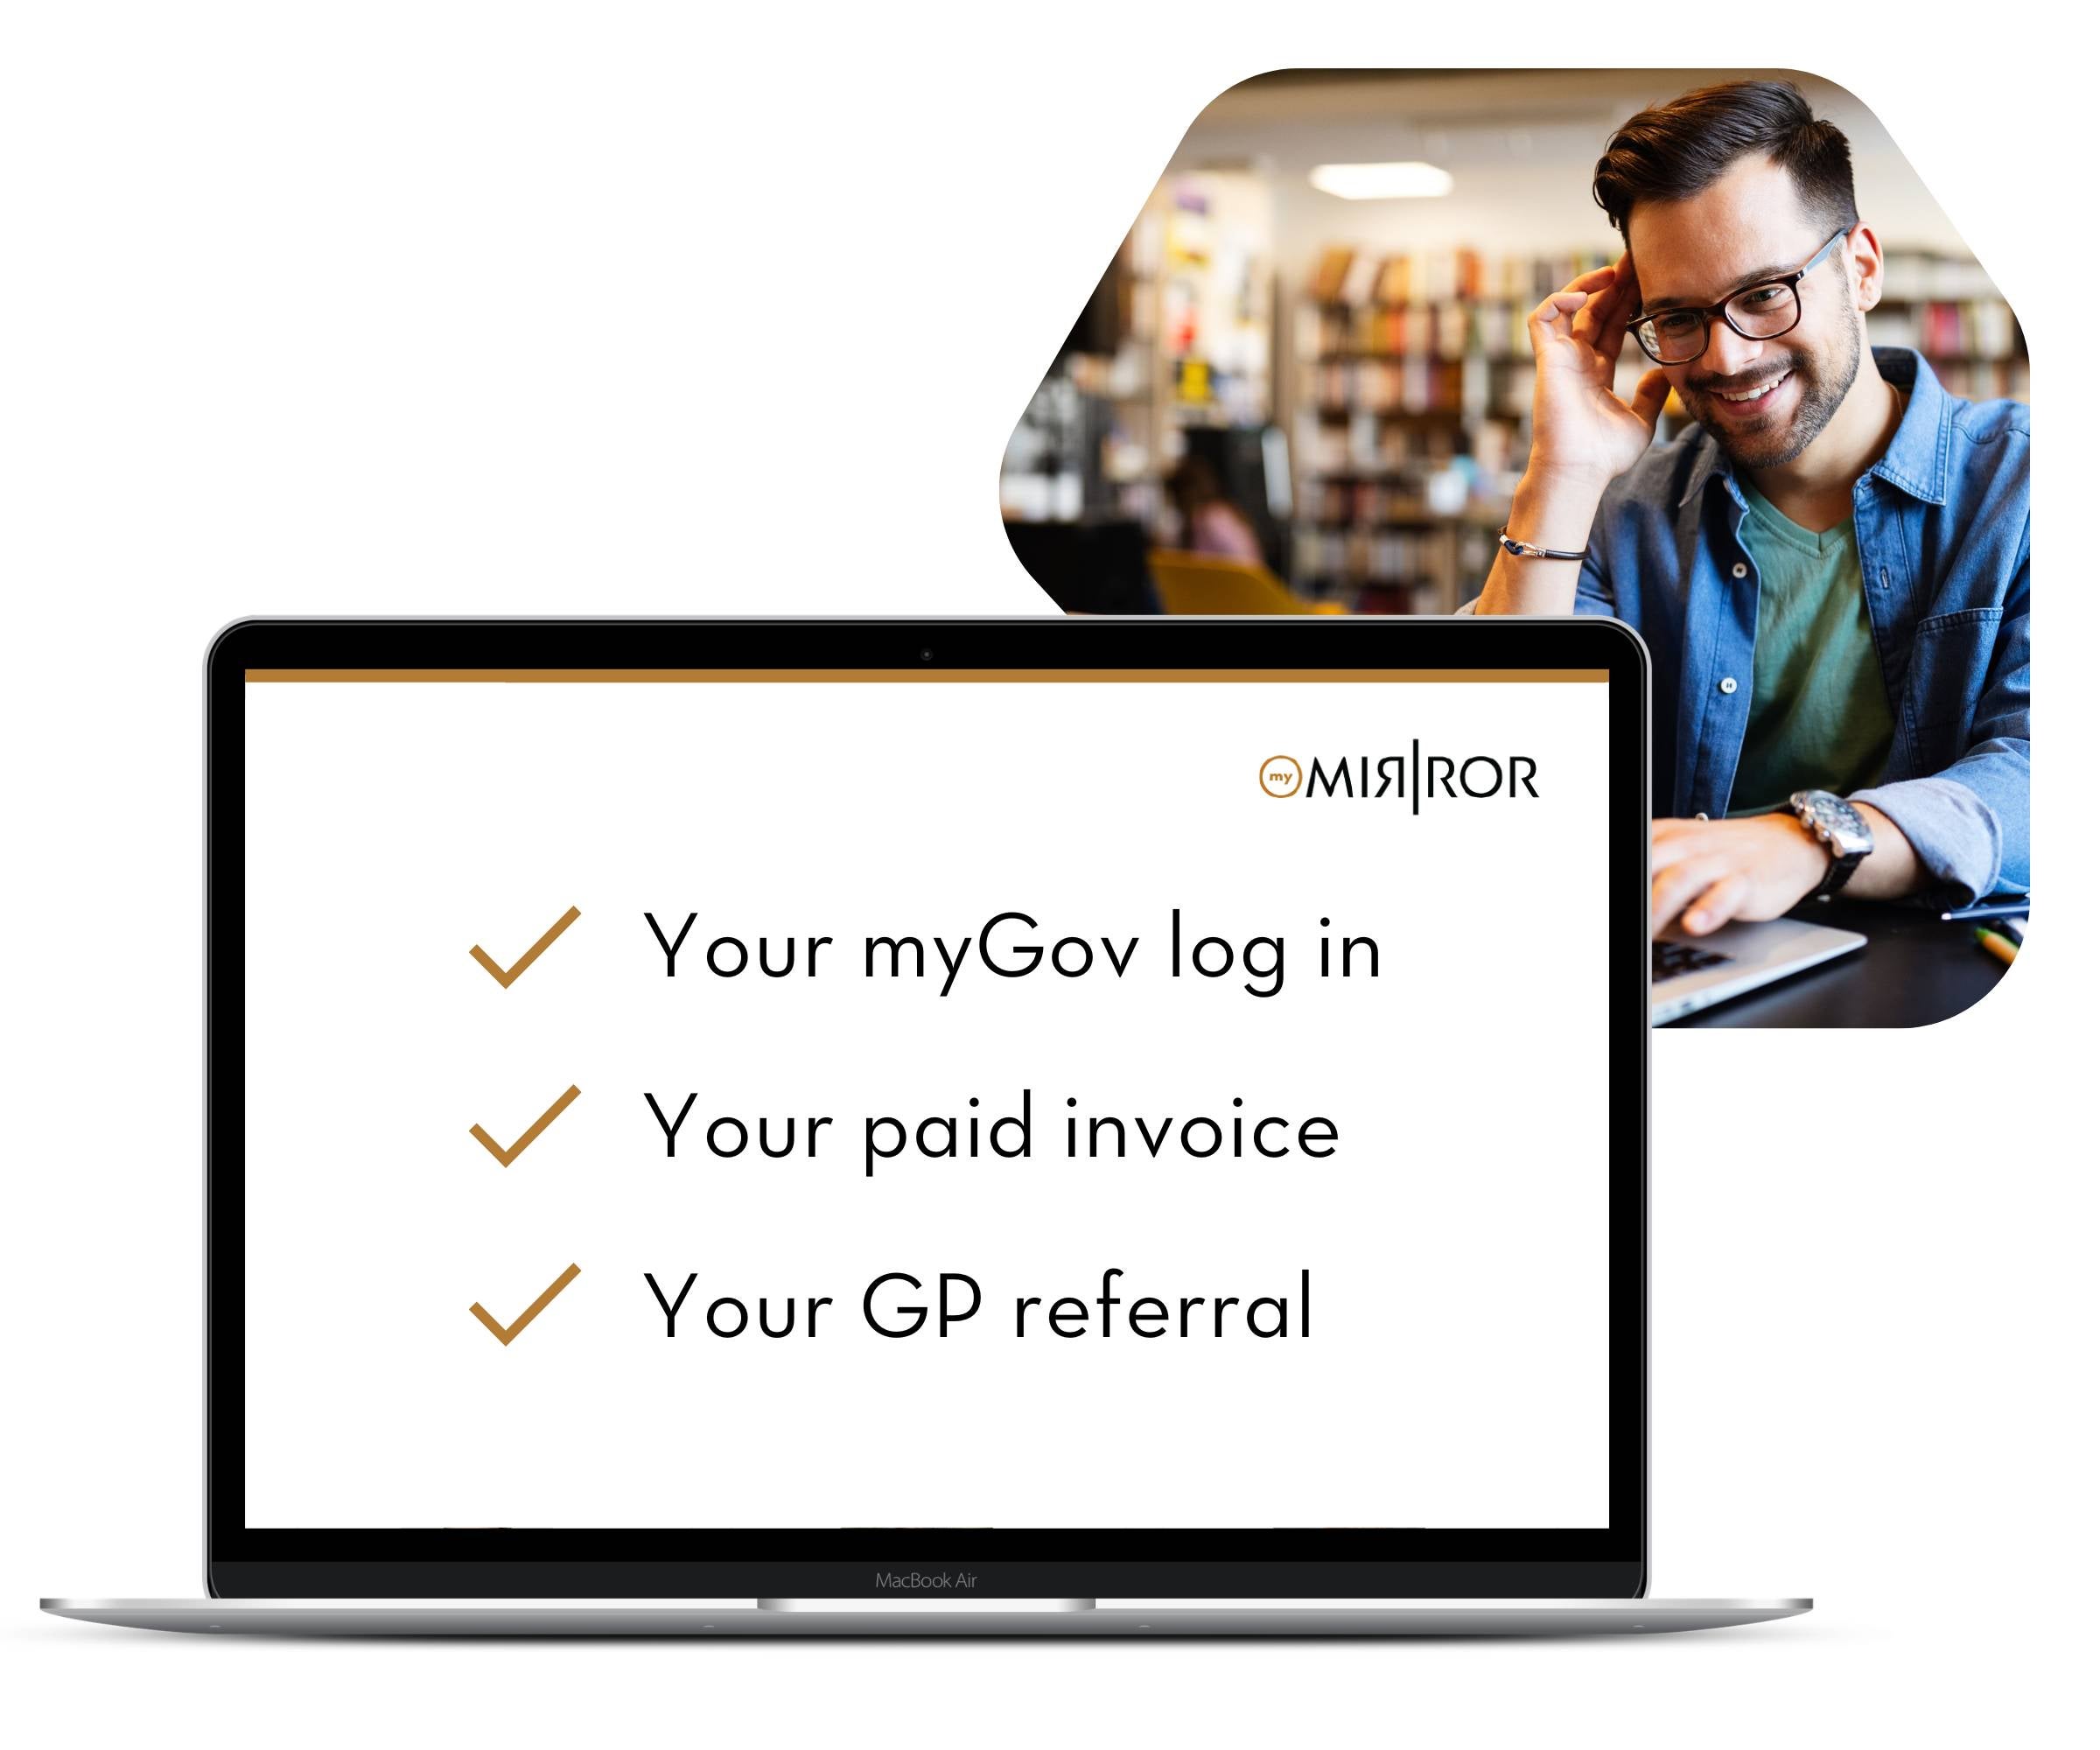 what you need for a Medicare claim: myGov login, paid invoice and GP referral